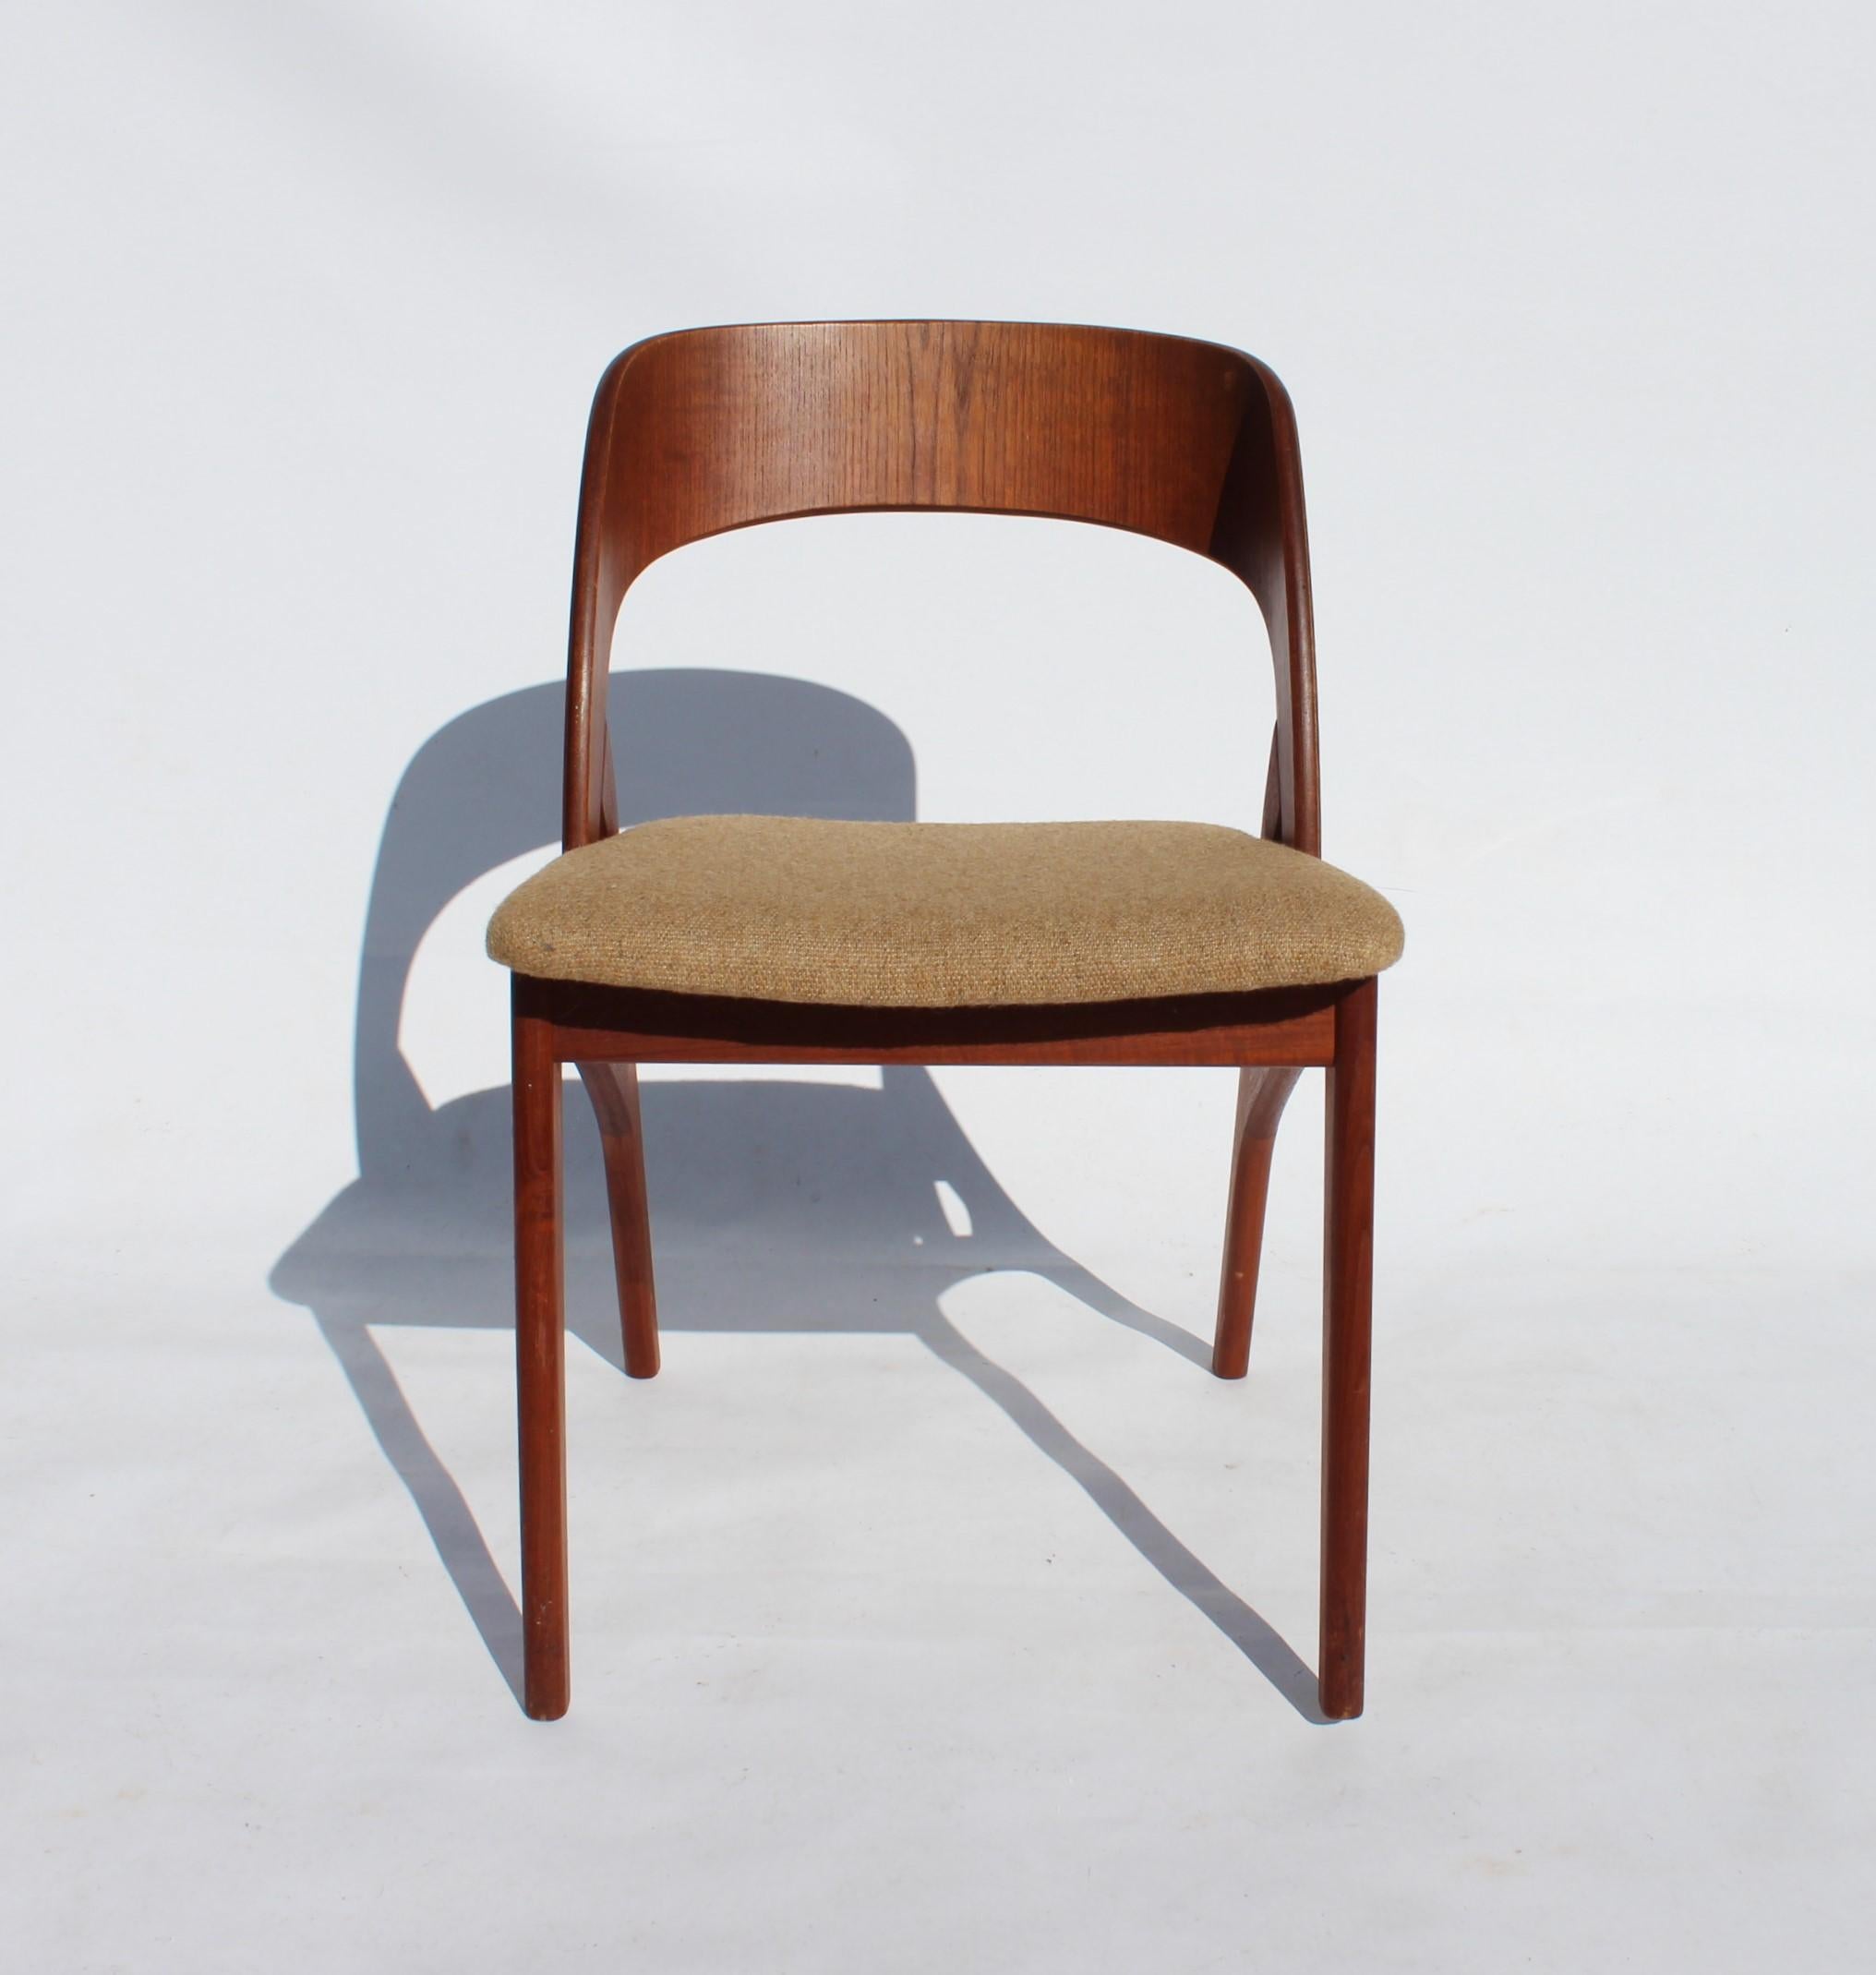 A set of six dining room chairs in teak and light fabric of Danish design from the 1960s. The chairs are in great vintage condition.